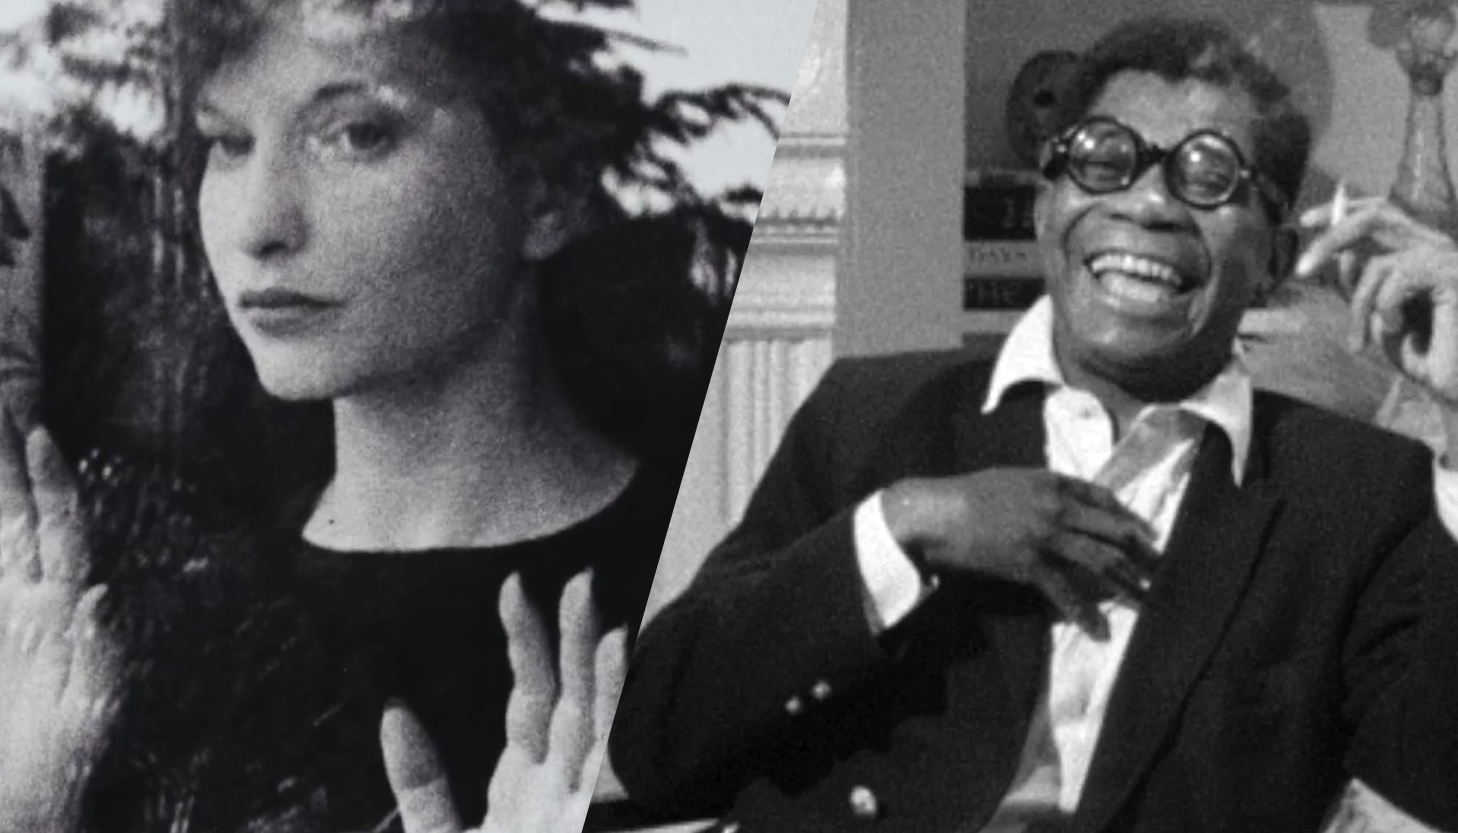 From left to right: black and white image of a white woman in black clothes pressing their hands to a window; a Black man in sunglasses and smoking a cigarette is seated with their mouth open in laughter